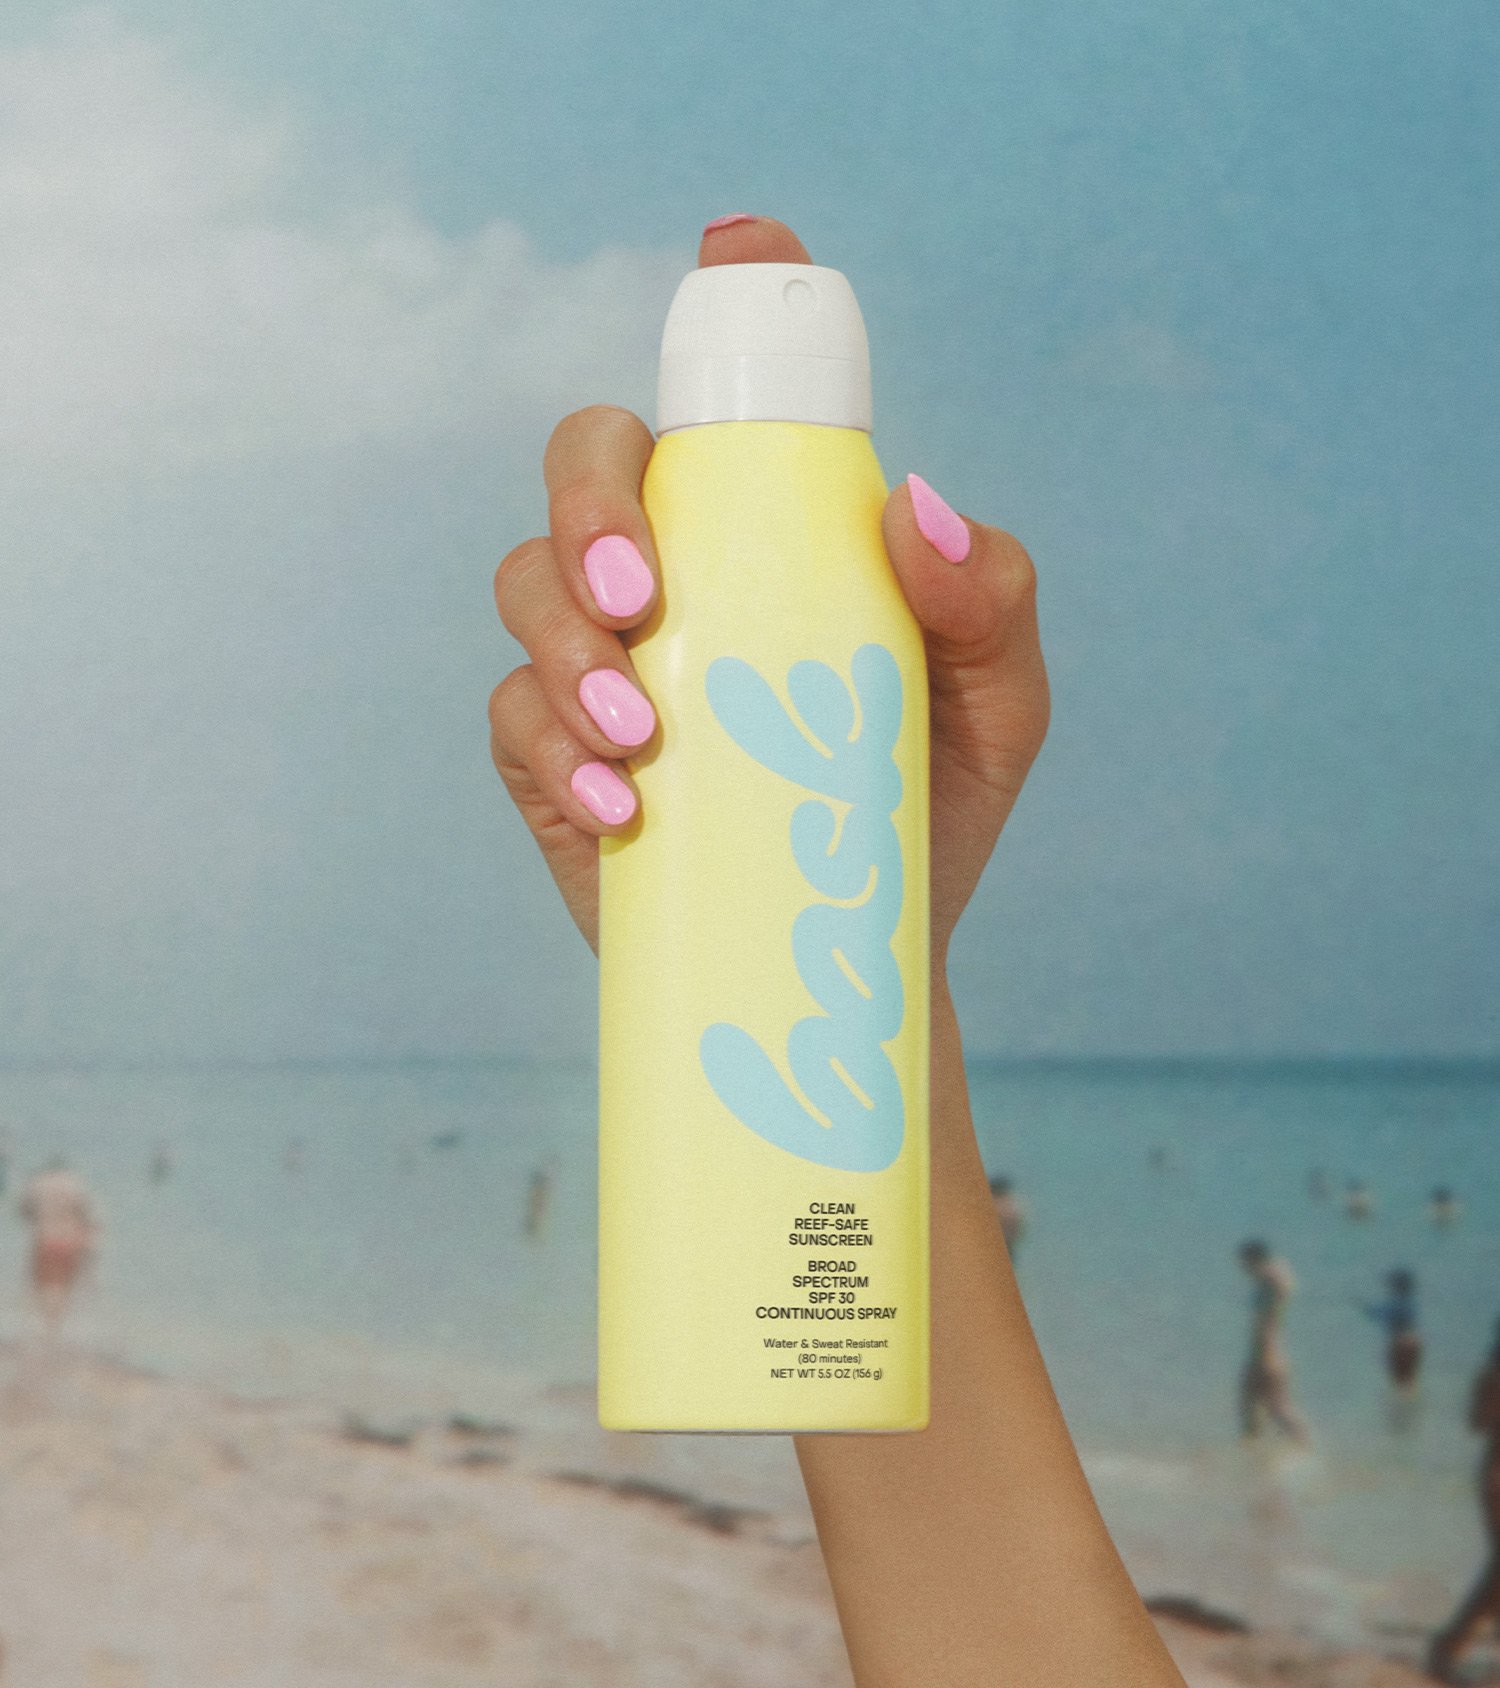 Bask Continuous Spray SPF 30 Held Up by Hand with Pink Manicure by the Beach, Art Direction by RoAndCo